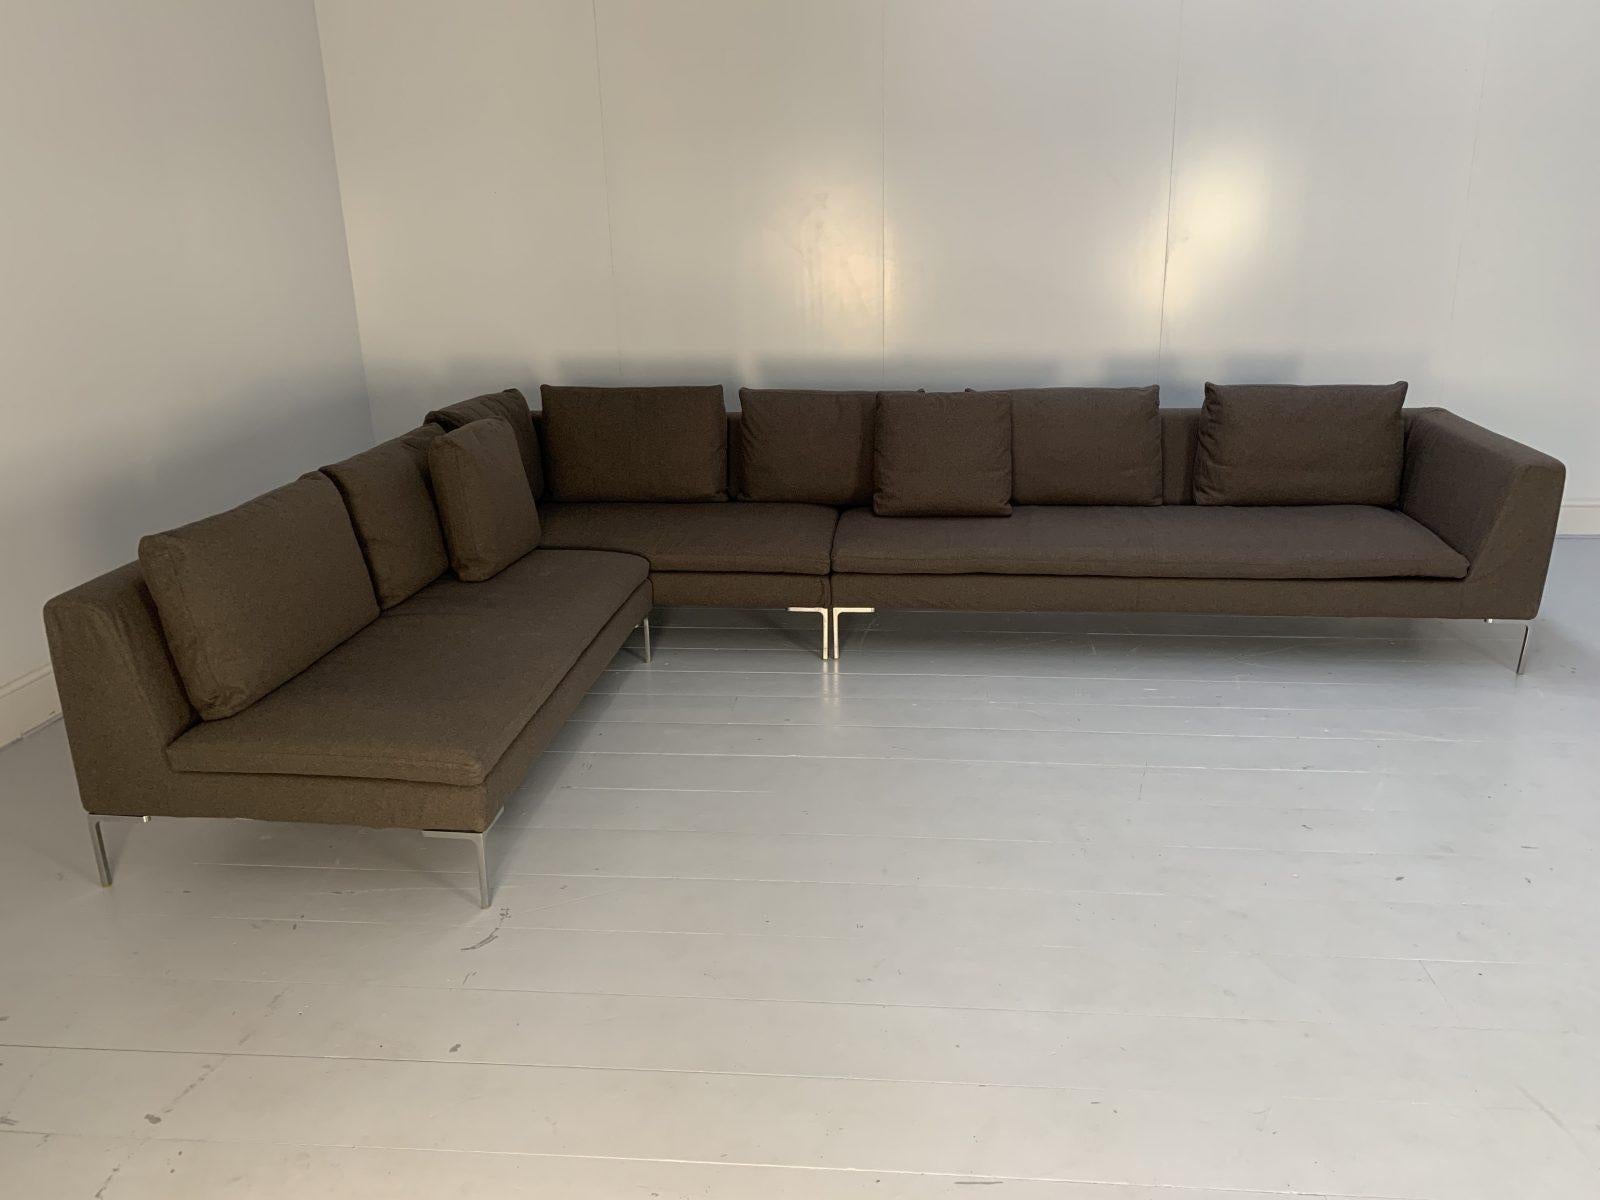 This is a huge, iconic “Charles” Sectional L-Shape Sofa (consisting of a CH156S, a CH228D and a CH156C section) from the “Maxalto” range of seating from the world renown Italian furniture house of B&B Italia.

In a world of temporary pleasures,